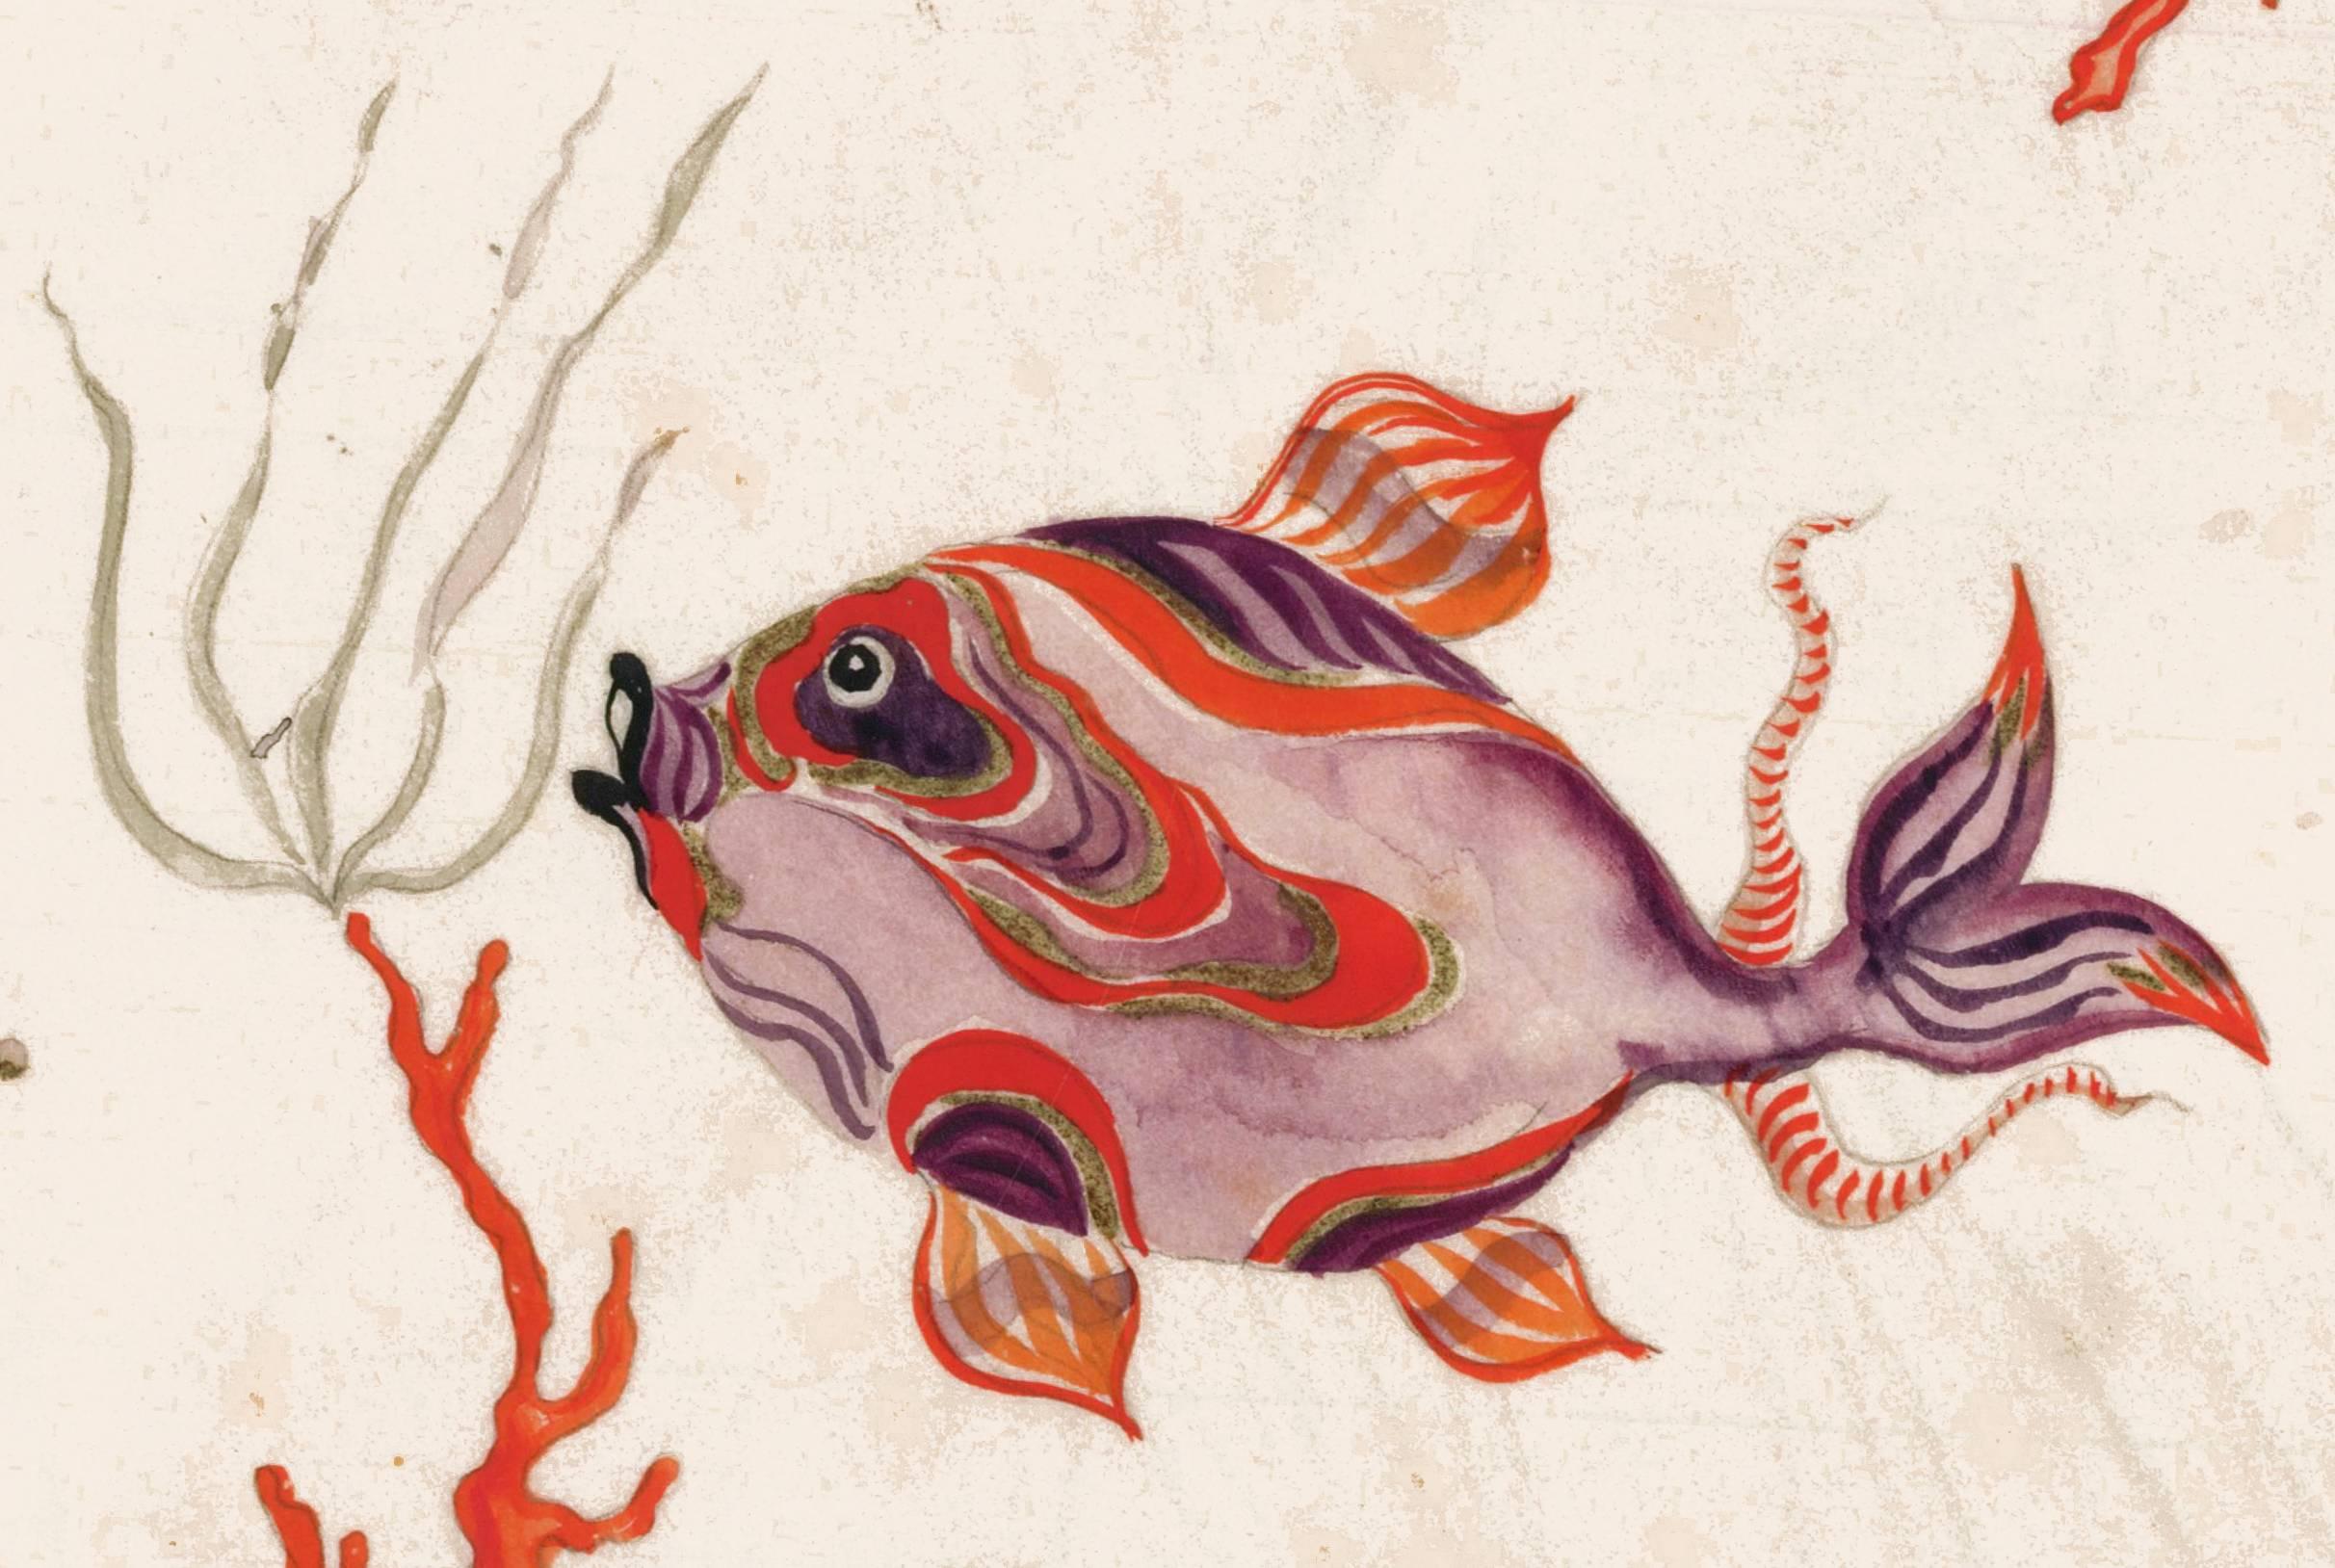 Original gouache of a fish and coral by Wiener Werkstatte artist, Ena Rottenberg. Signed with her initials on the lower right edge of the image. Likely a design for a porcelain plate. Rottenberg (1893-1962) was a student of Michael Powolny at the